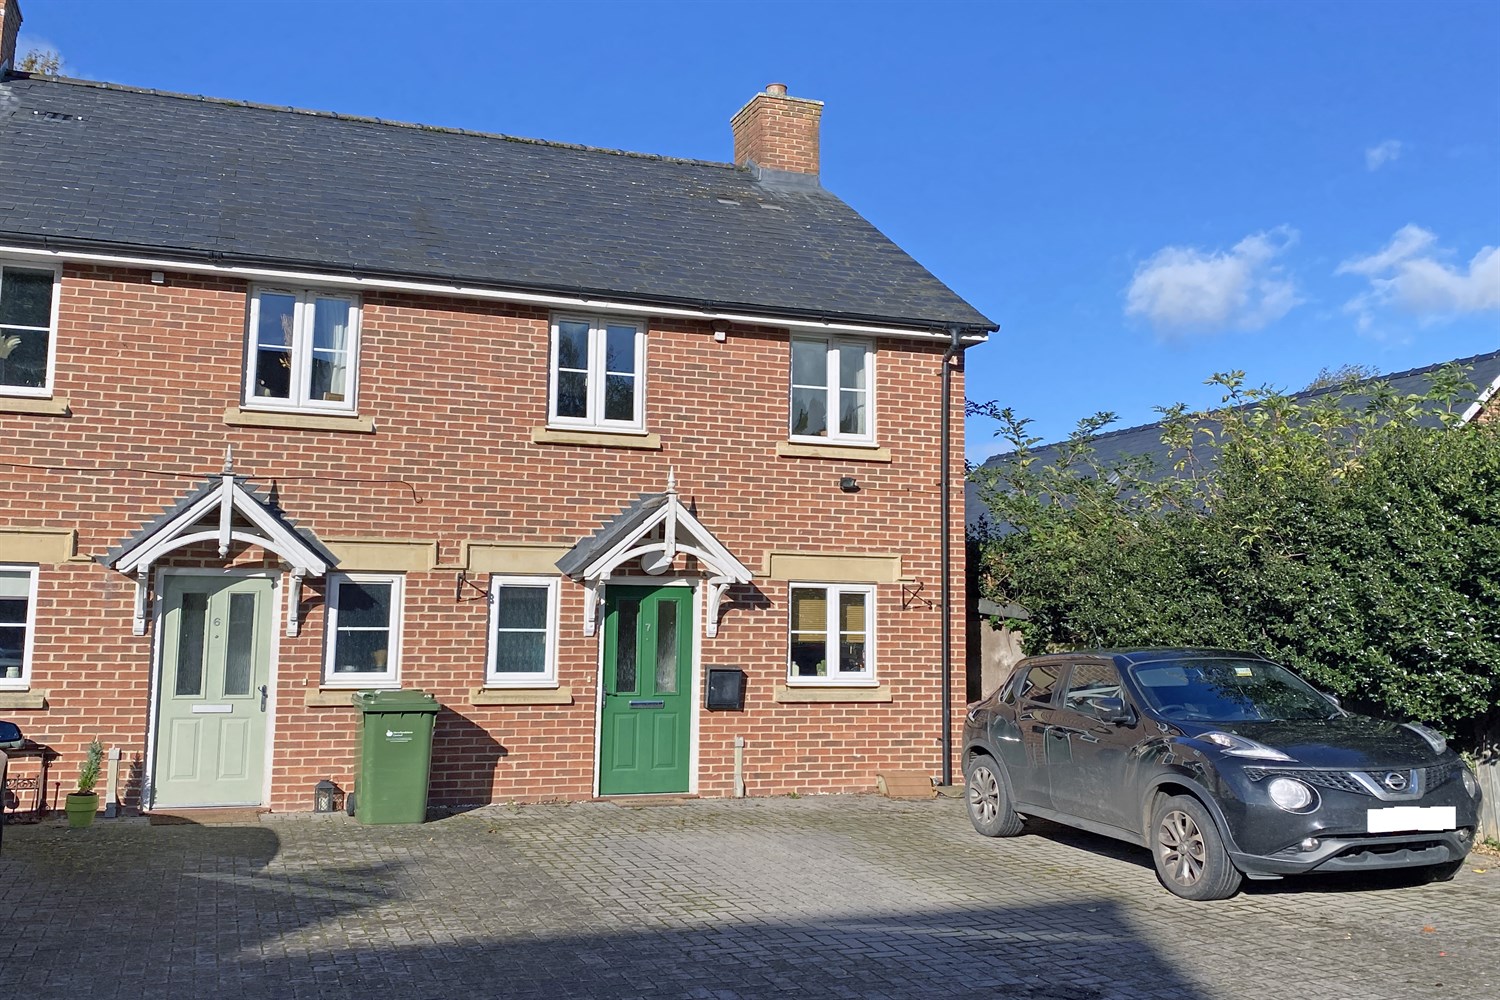 7 St. Marys Close, Madley, Hereford